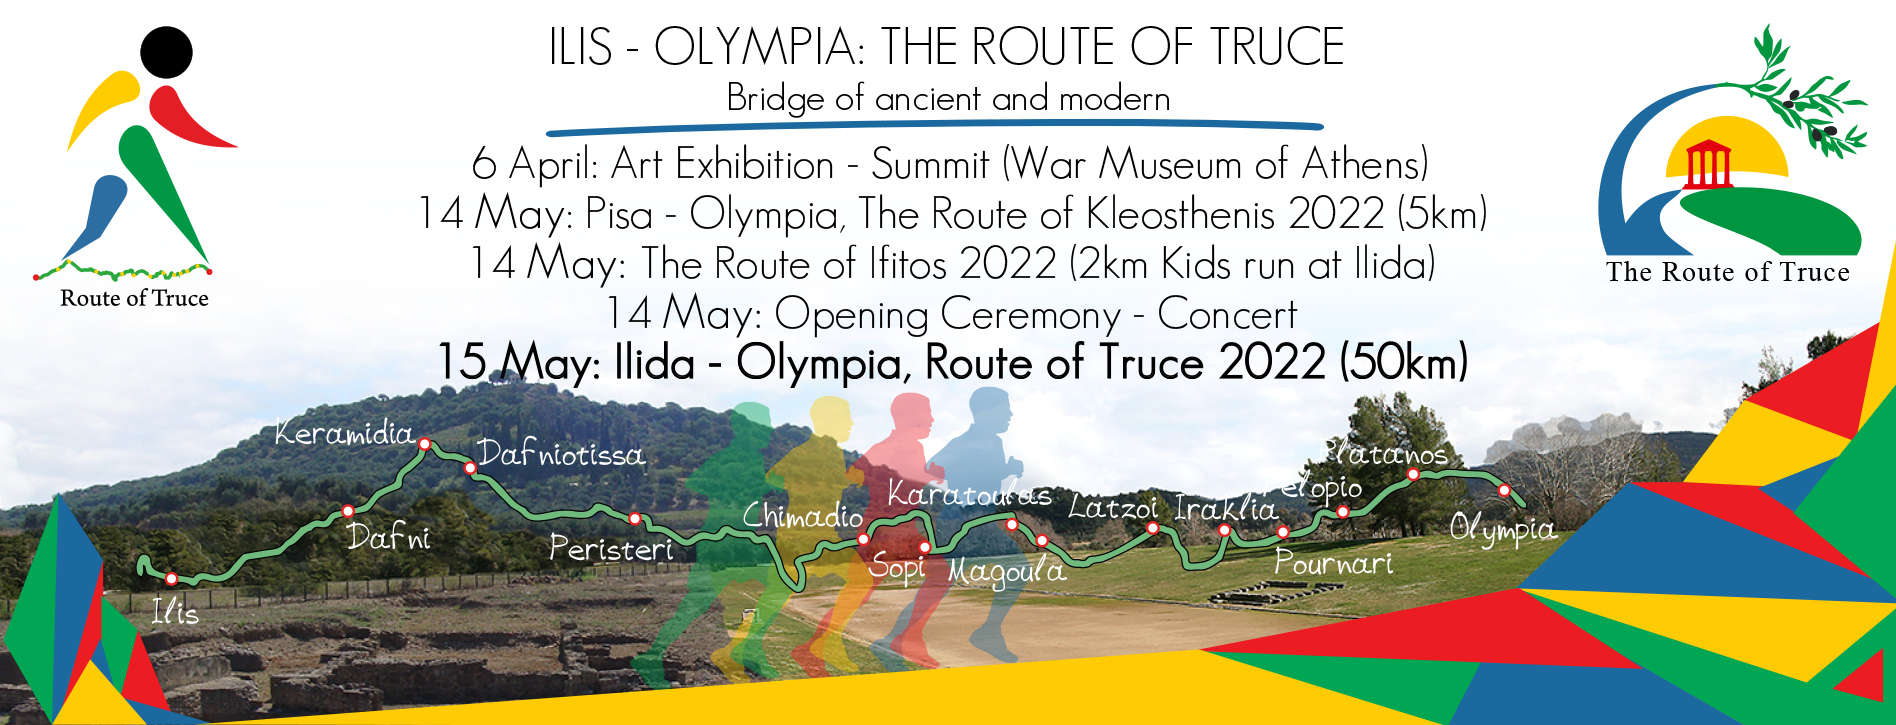 ROUTE OF TRUCE 2022